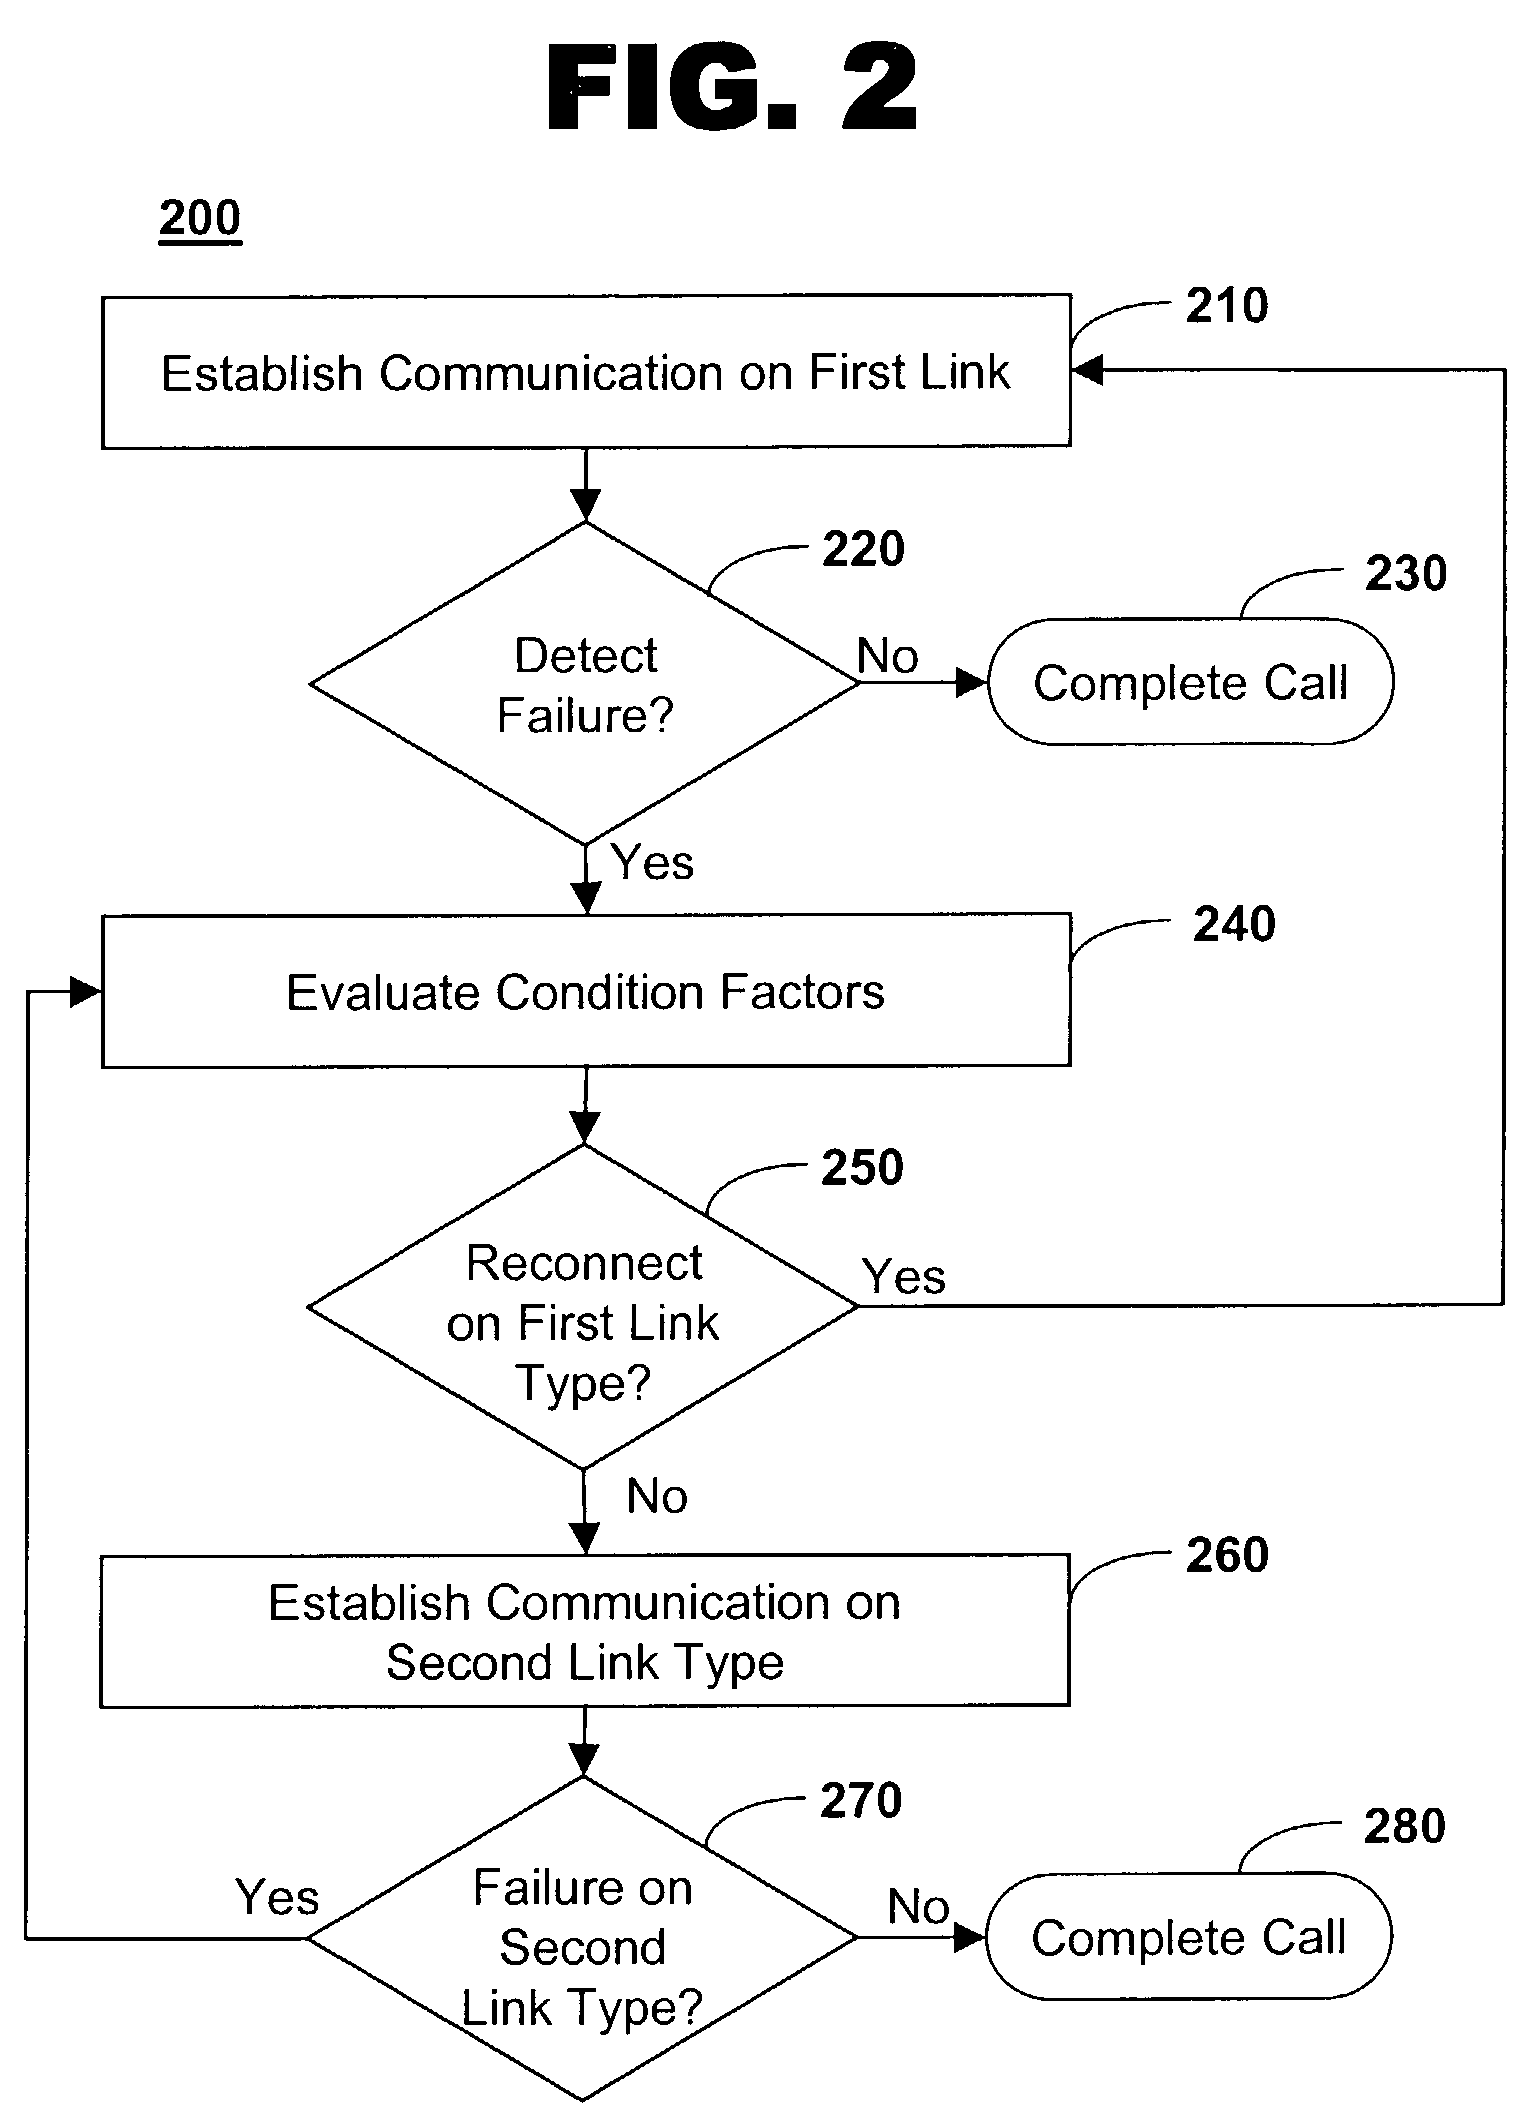 Communication retry method over digital wireless systems